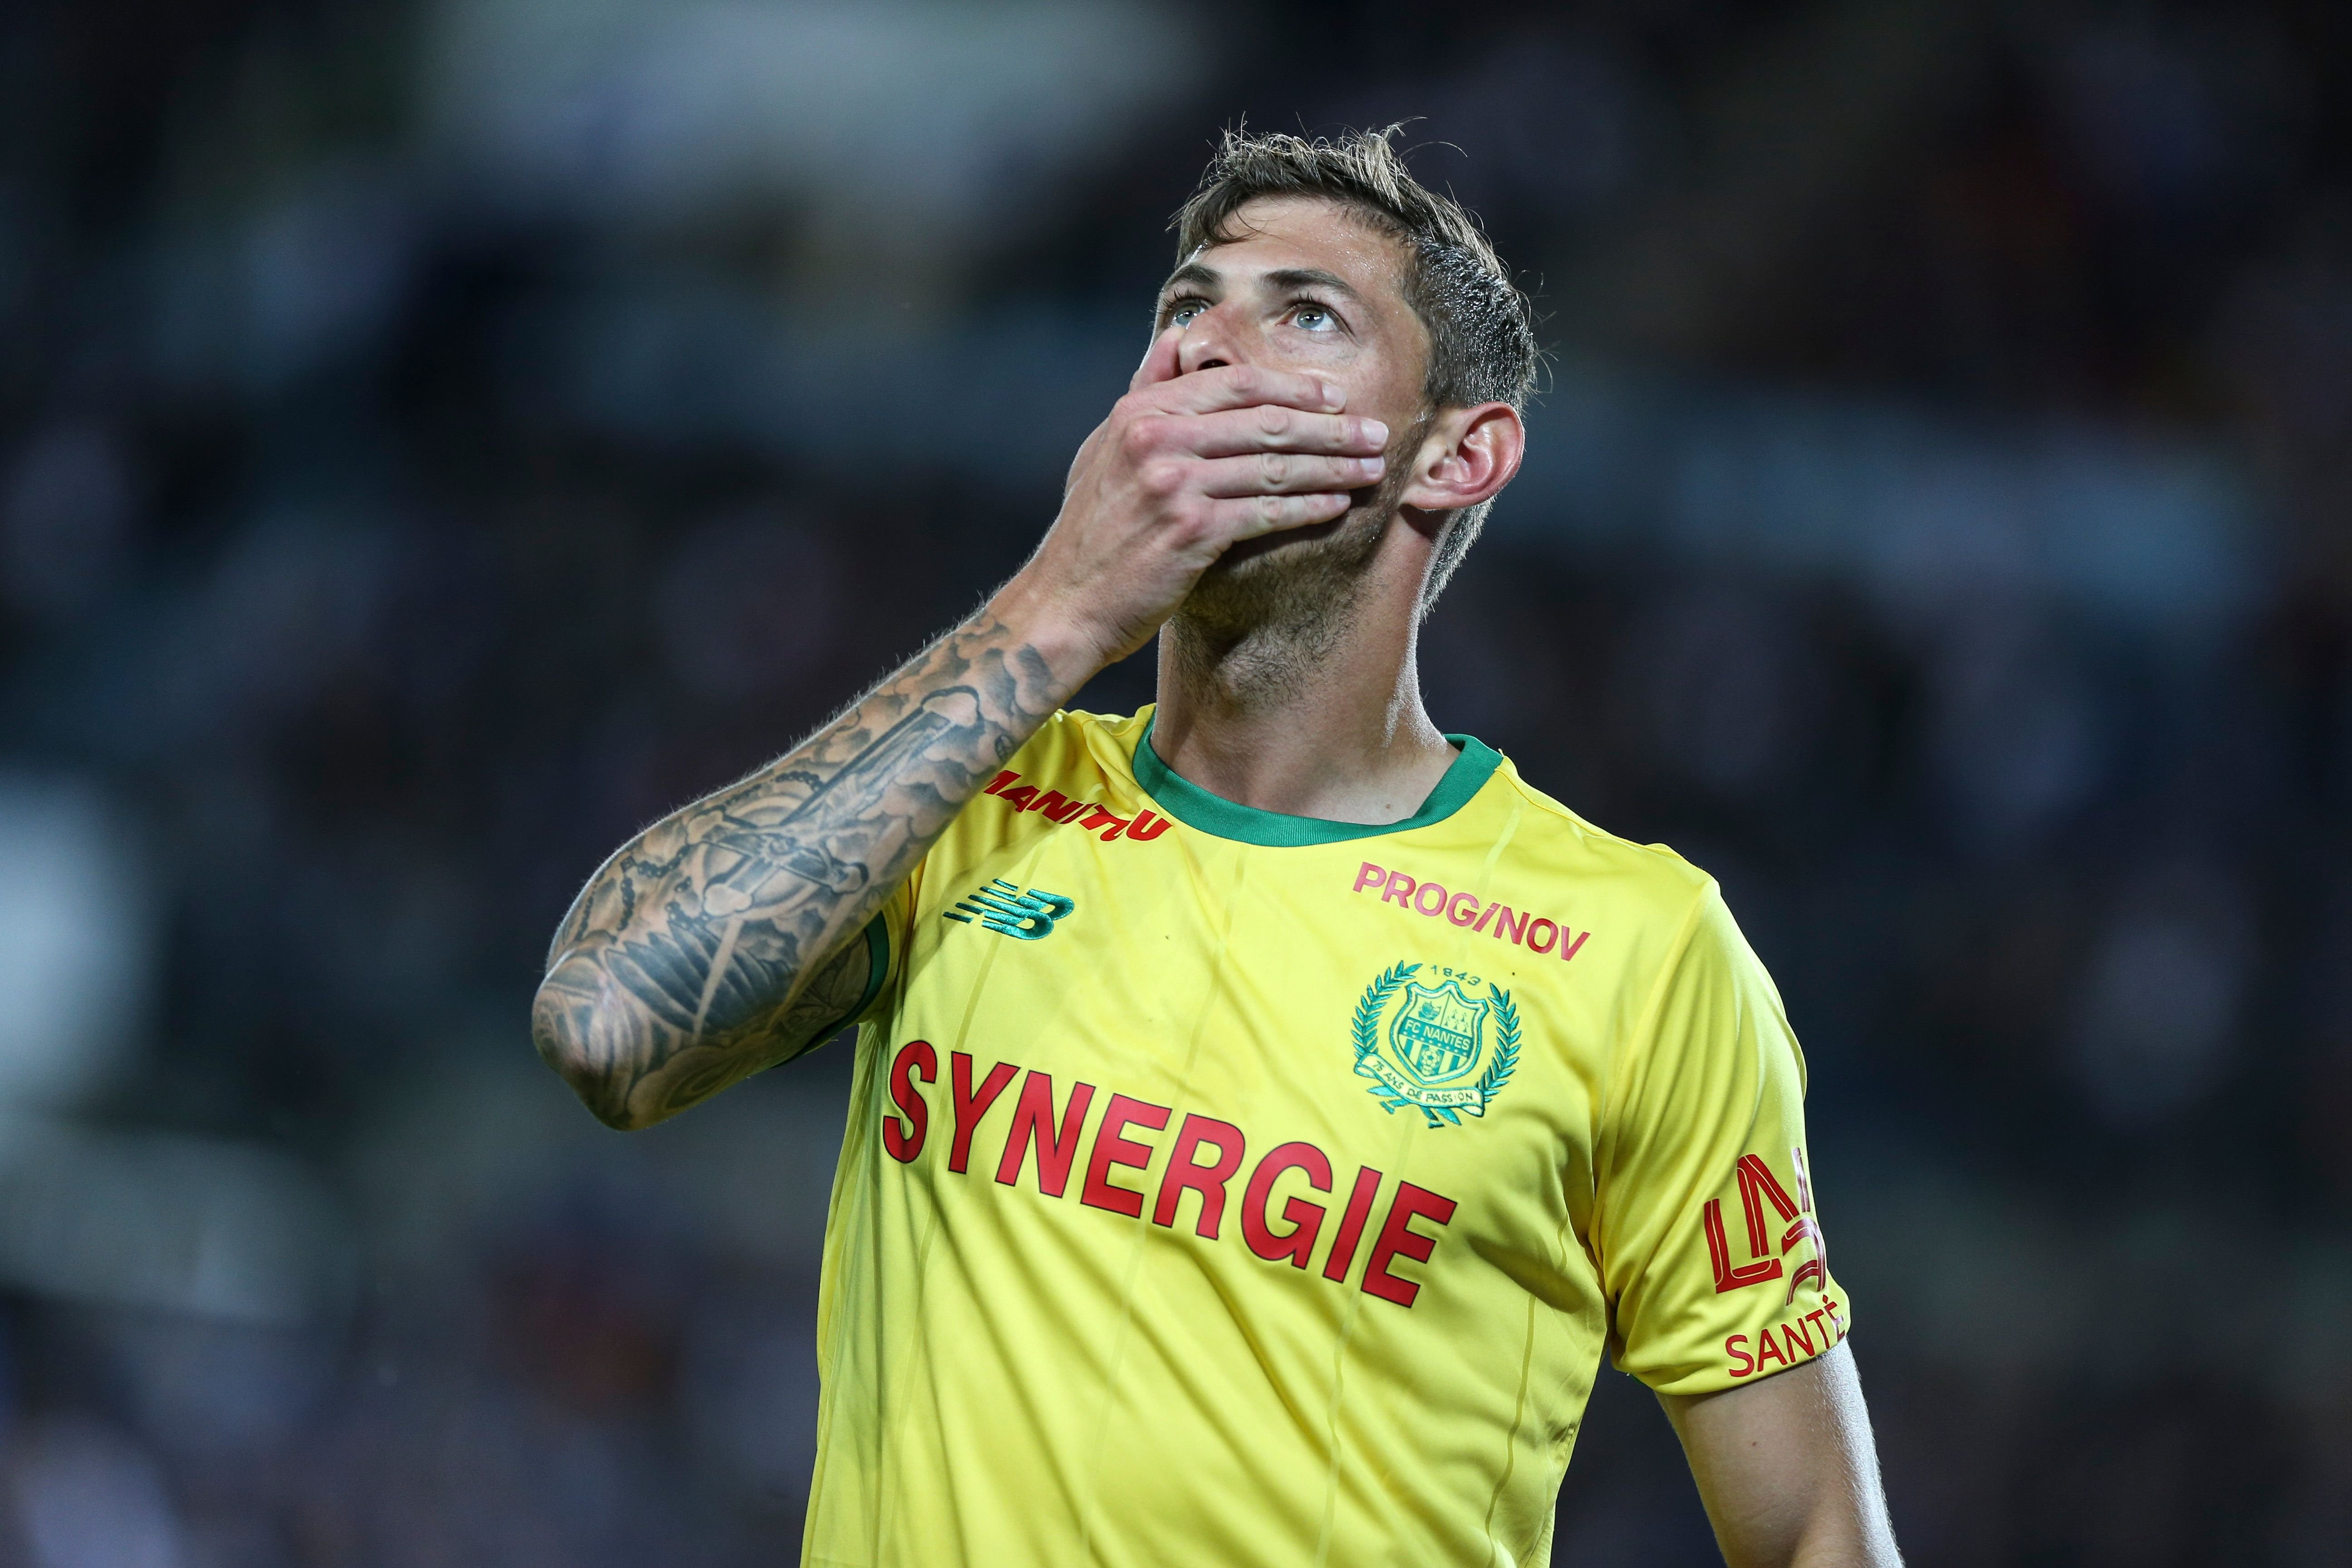 Nantes' players, Sala Emiliano, celebrate a goal during the French L1 football match between Strasbourg (RCSA) and Nantes (FCN) on September 1, 2018, at the Meinau Stadium in Strasbourg, eastern France. | Foto von: Elyxandro Cegarra/NurPhoto via Getty Images